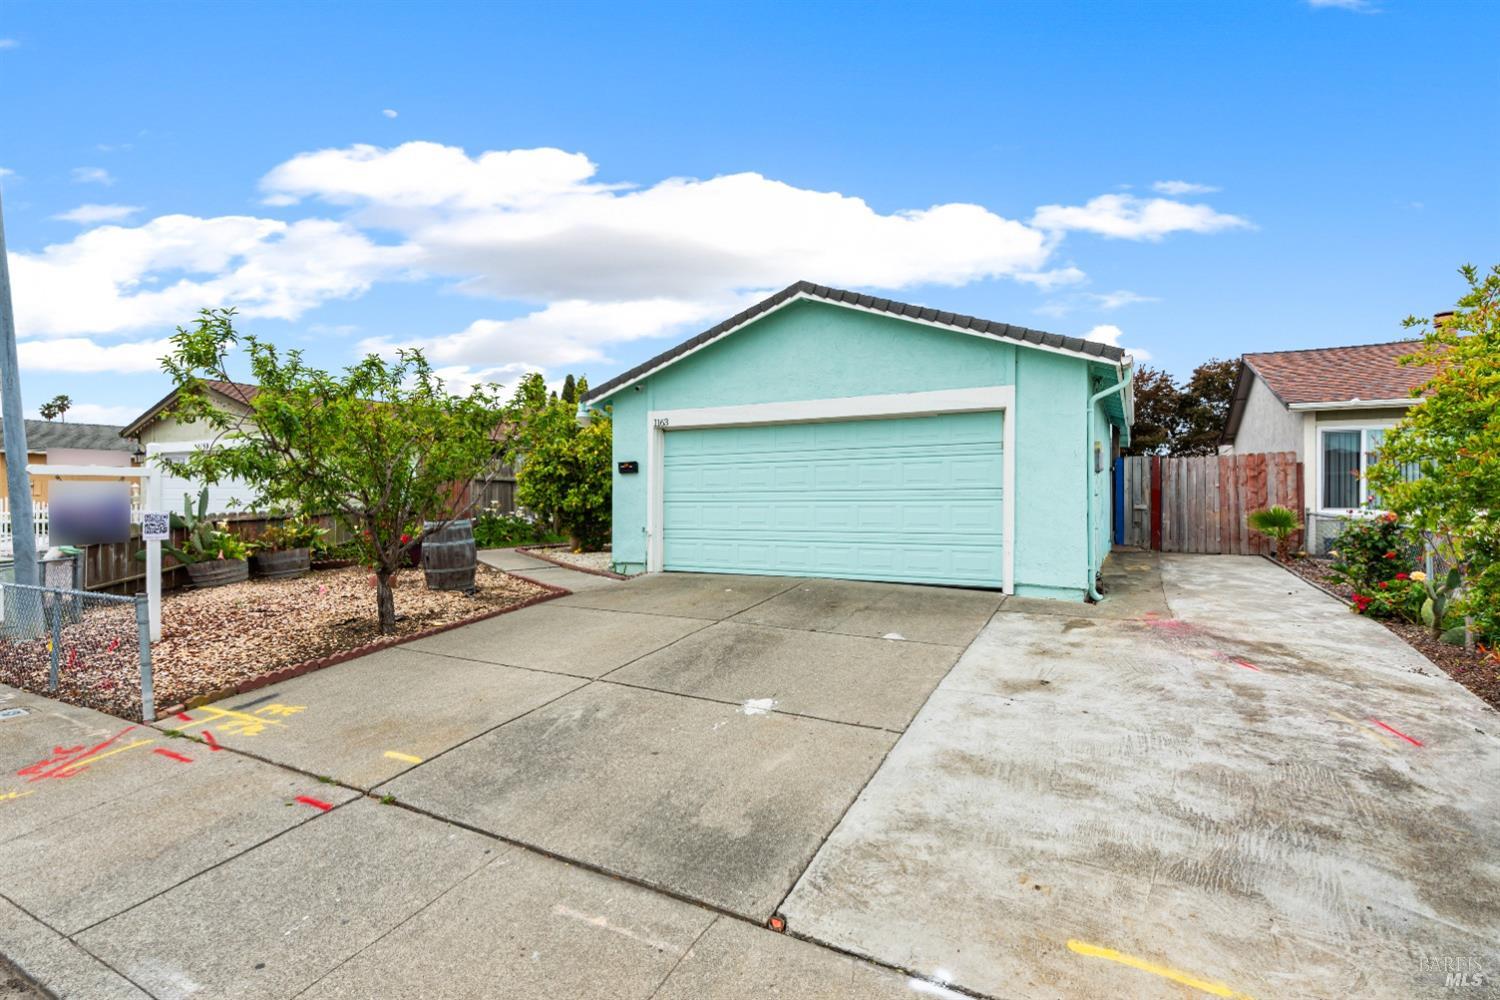 Discover comfort and convenience at 1163 Jack London Dr, Vallejo, CA. This inviting 3-bedroom, 2-bat